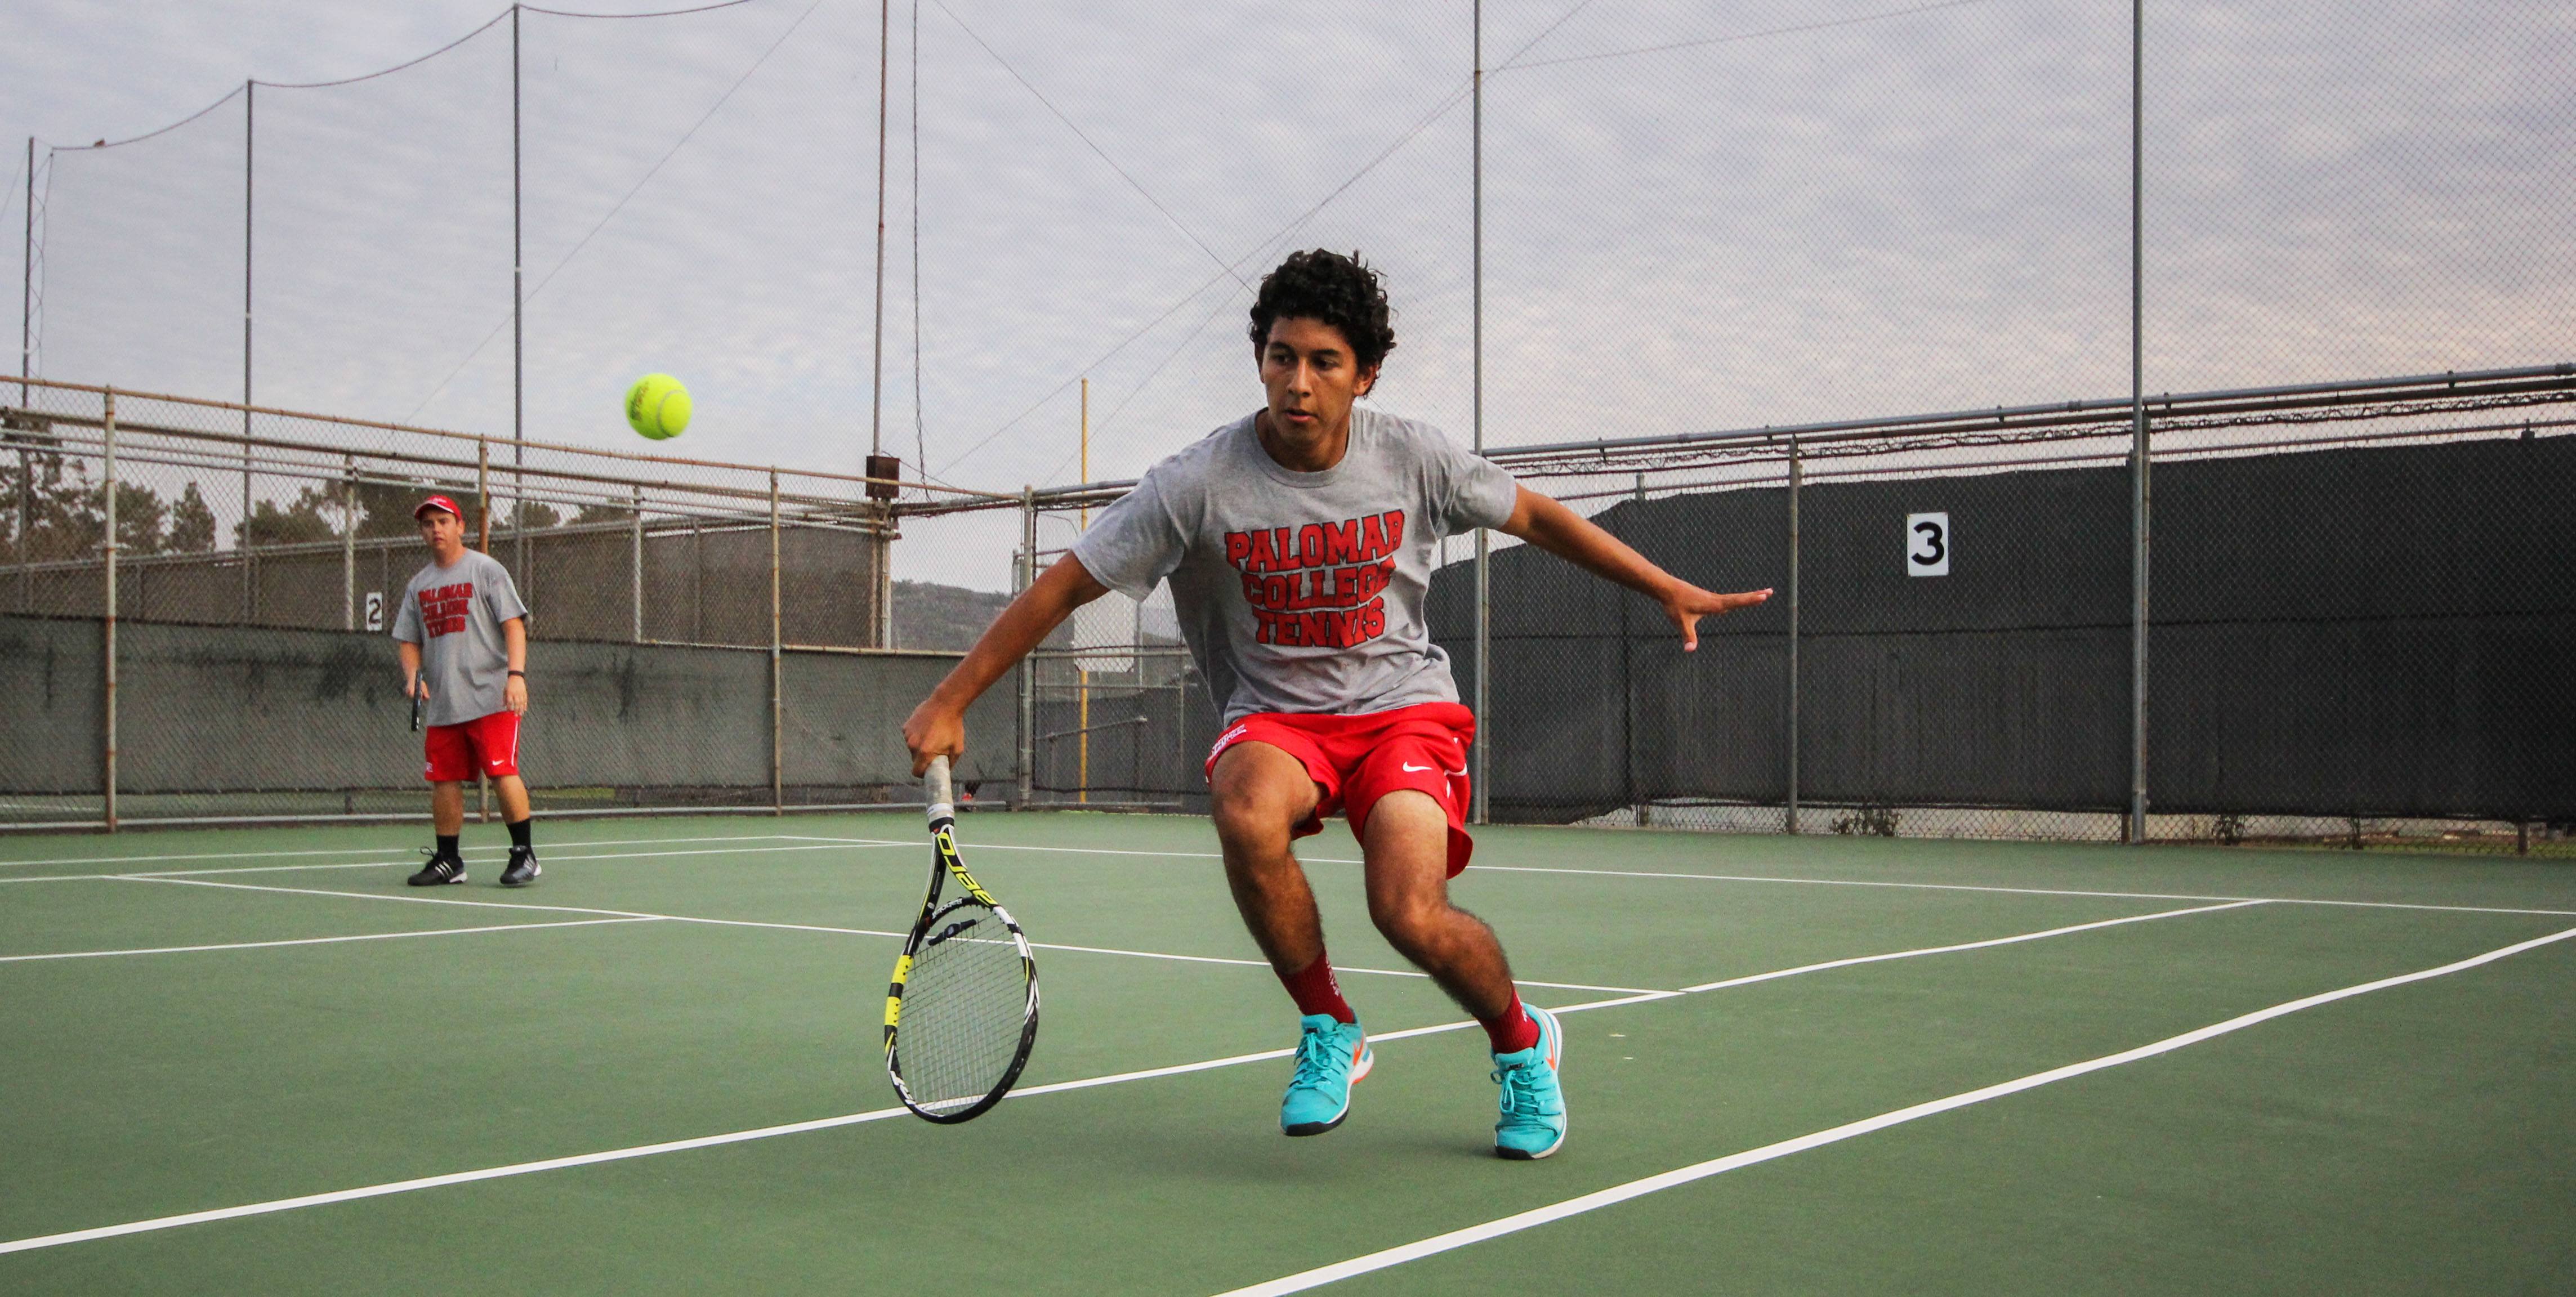 Palomar College Tennis players Jonathan Rodriguez and Vince Rivera won their Men's Doubles match against San Diego City College after playing a third set that ended 10-3, Feb 19, 2015. (Dirk Callum/The Telescope)